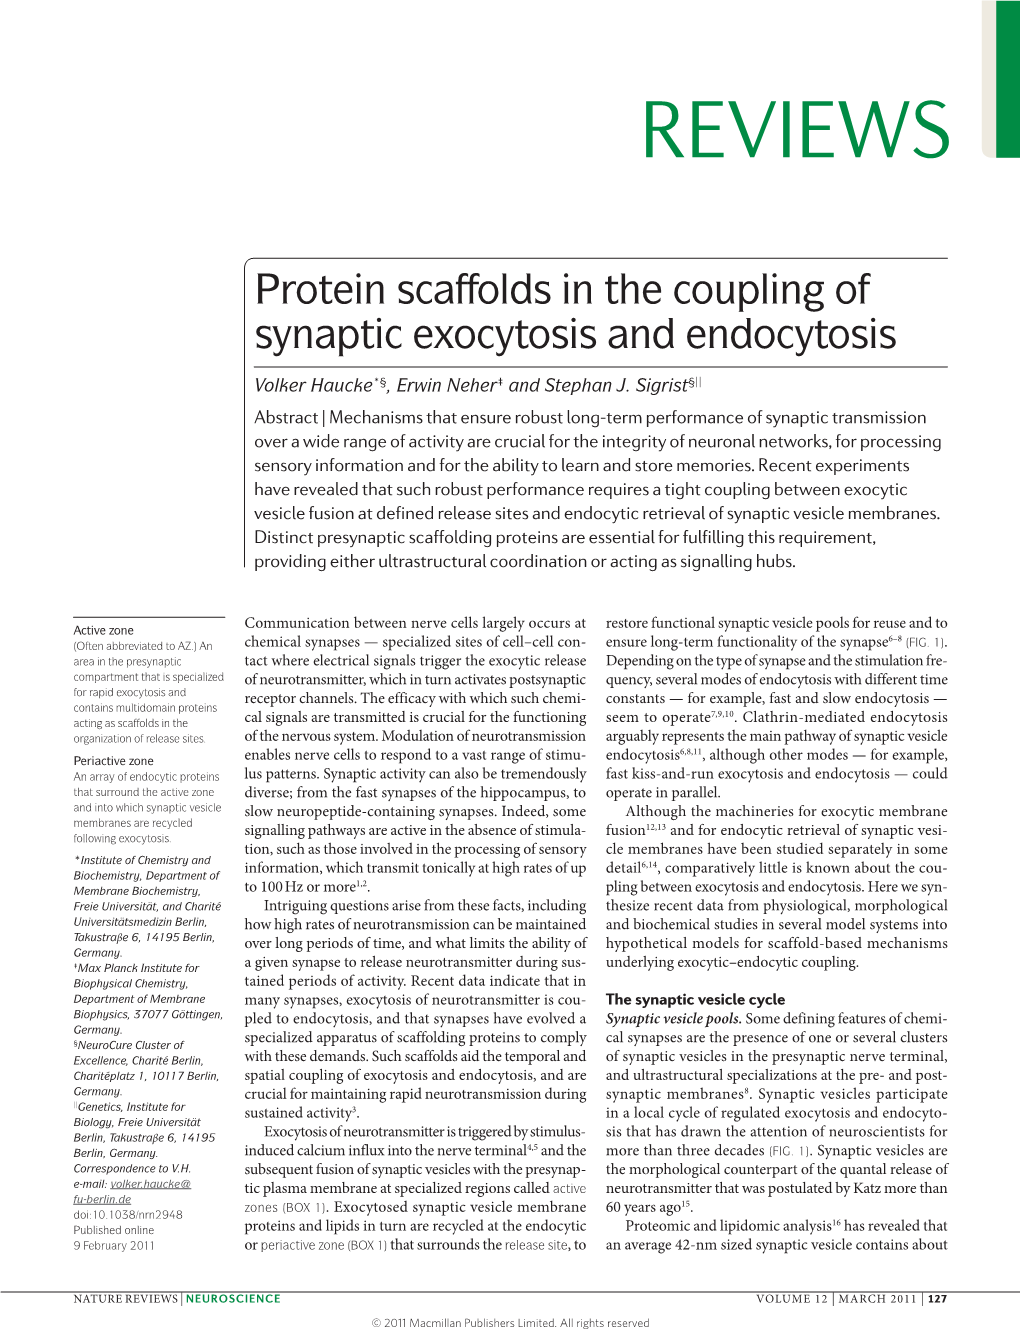 Protein Scaffolds in the Coupling of Synaptic Exocytosis and Endocytosis